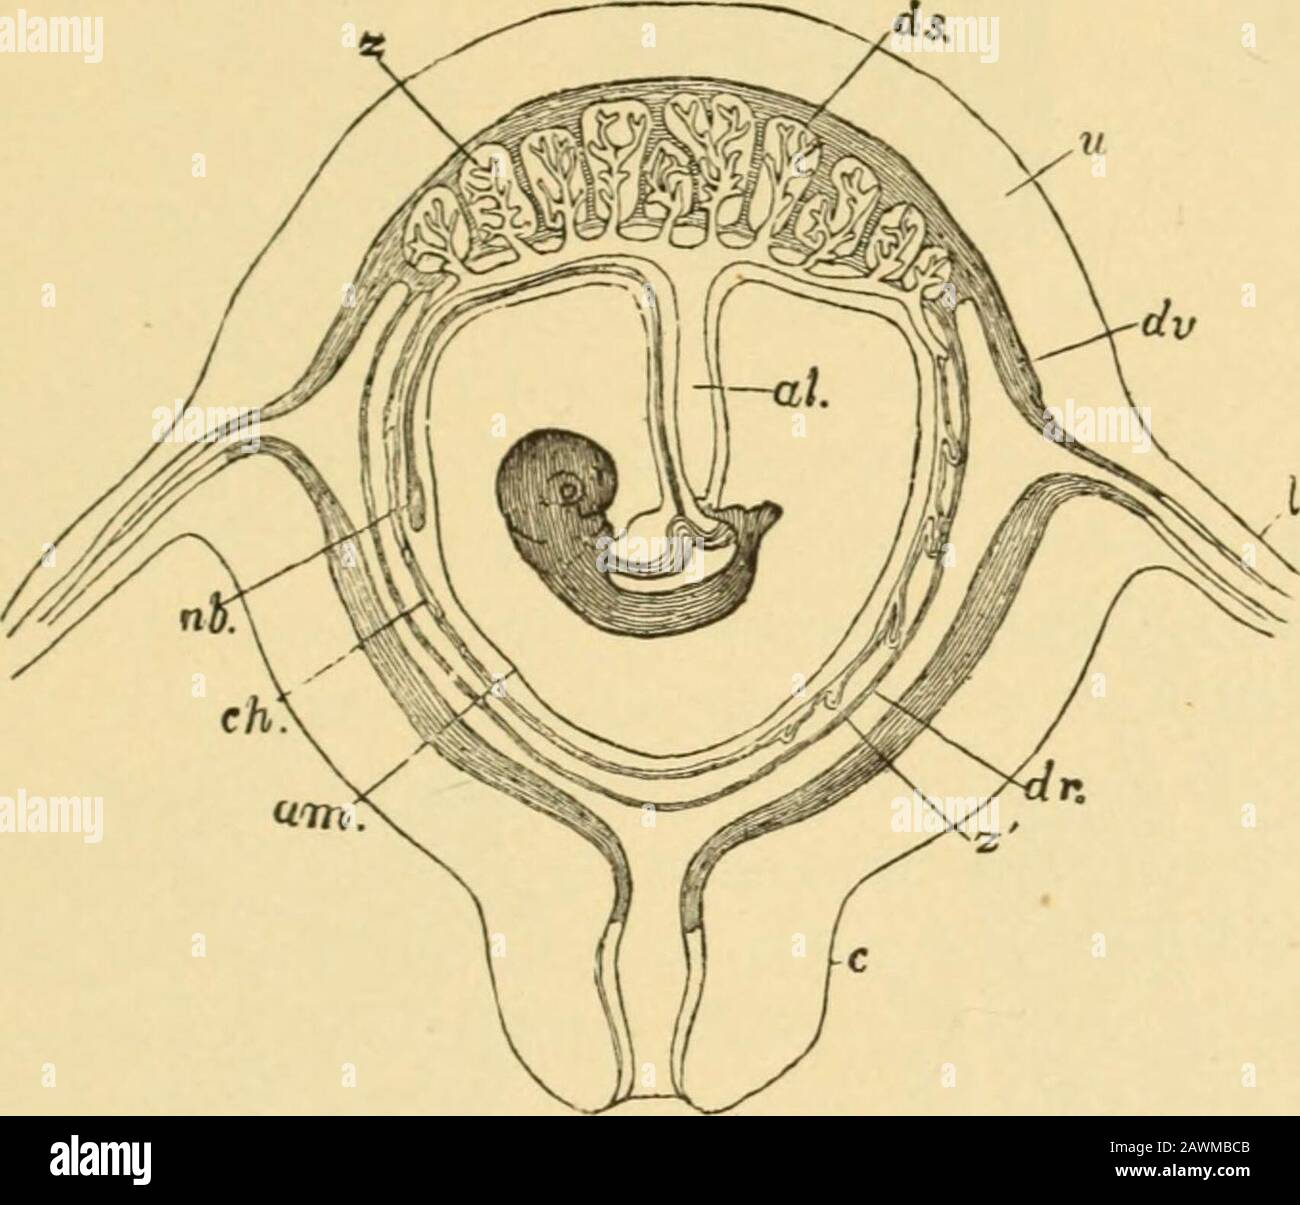 A system of obstetrics . true chorionic villi. * Comparative Embryology, vol. ii. p. J&lt;»». (From Kdlliker.) Diagrammatic Section of theHuman Embryo after the allantoic hasspread all over the Inside of the Bubzonalmembrane, tunning the true chorion, fromwhich large branched villi are seen tu radi-ate : ;?, cavity of false amnion or primitiveamniotic cavity ; am, true amnion ; as, amni-otic or somatopleuiie .-talk of umbilical cord;ah, cavity of true amnion ; ds, umbilical vesi-cle; dg, umbilical duct,; ai, stalk of allan-tois; cAjs, chorionic villi; sA, subzonal mem-brane; ?/;. allantole lin Stock Photo